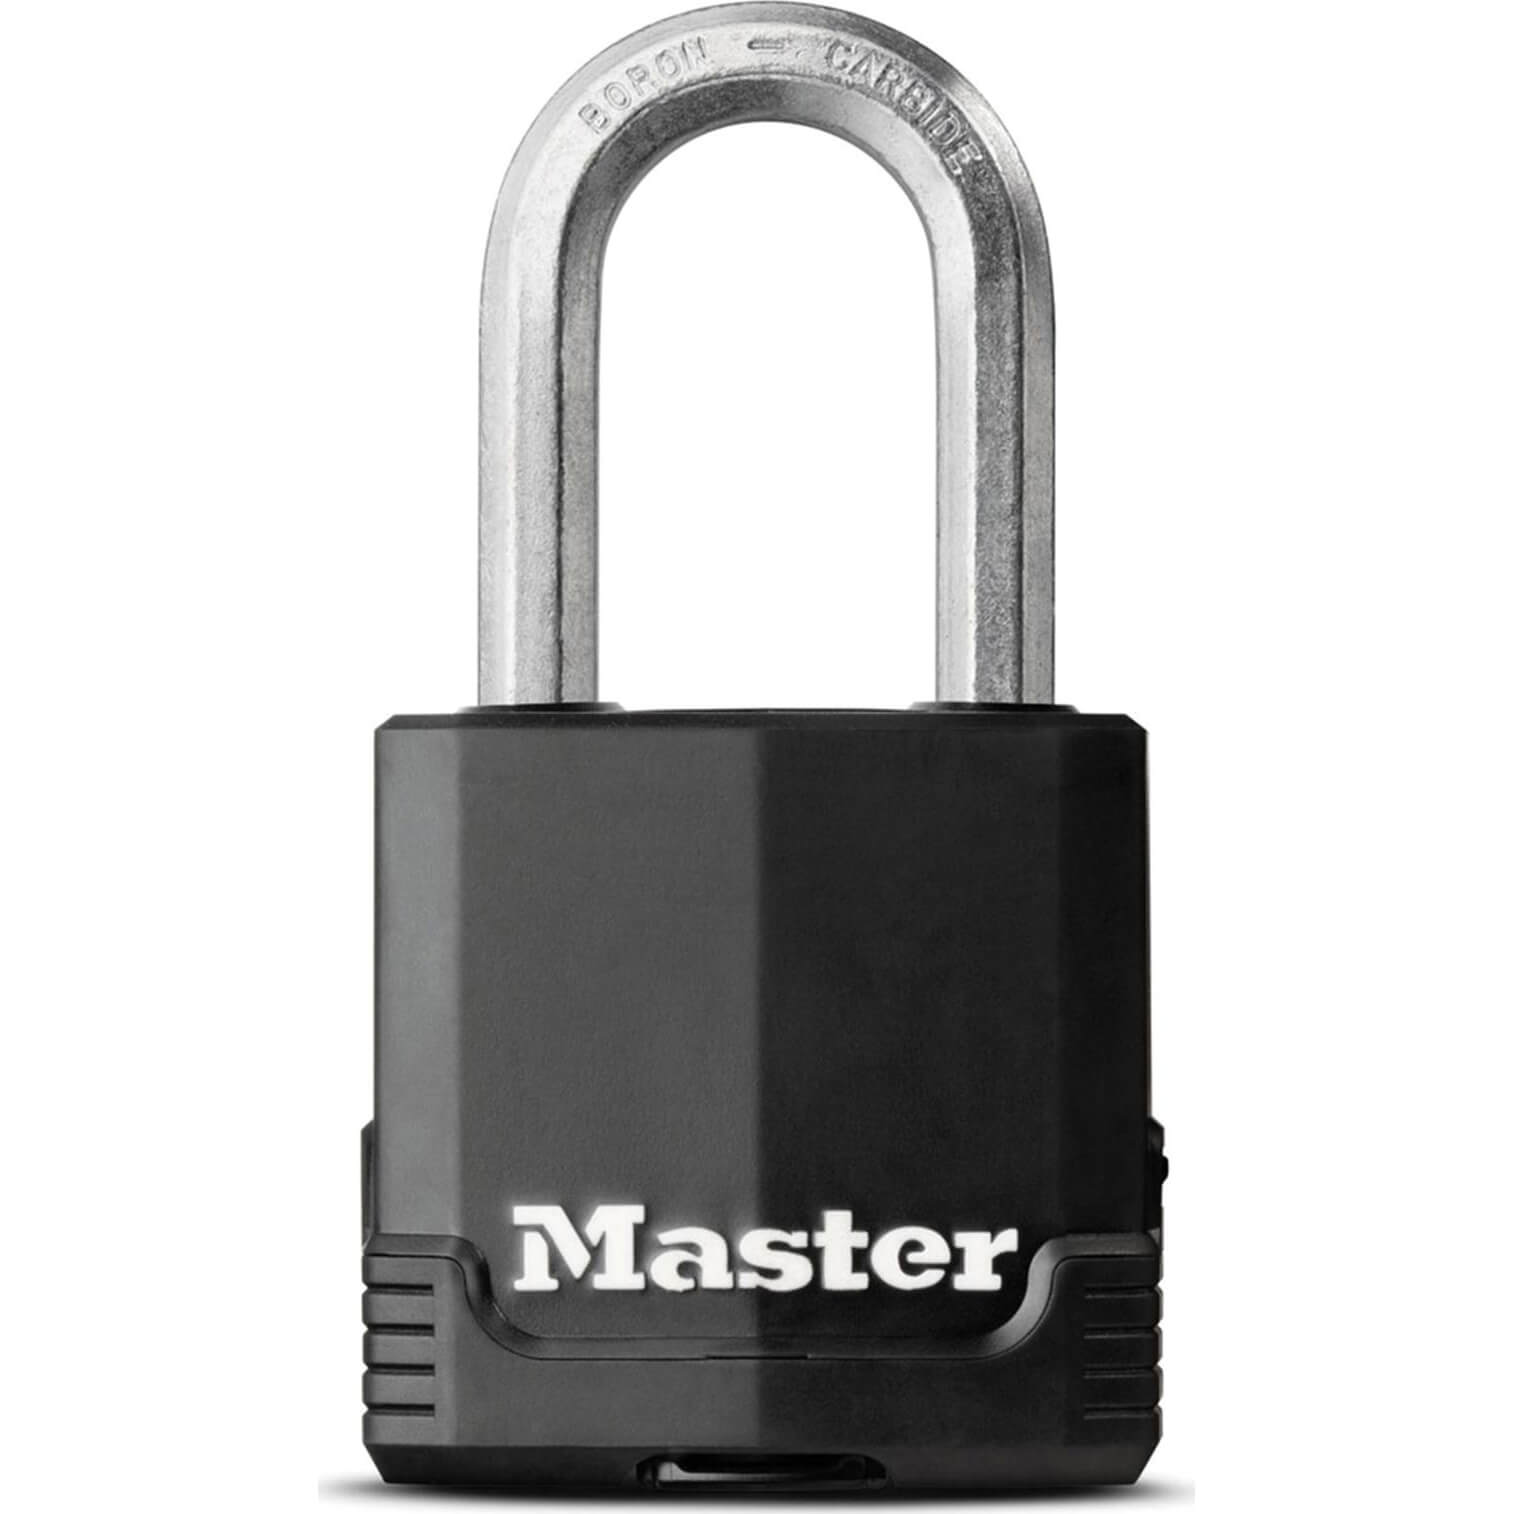 Image of Masterlock Excell Weather Tough Padlock 48mm Standard